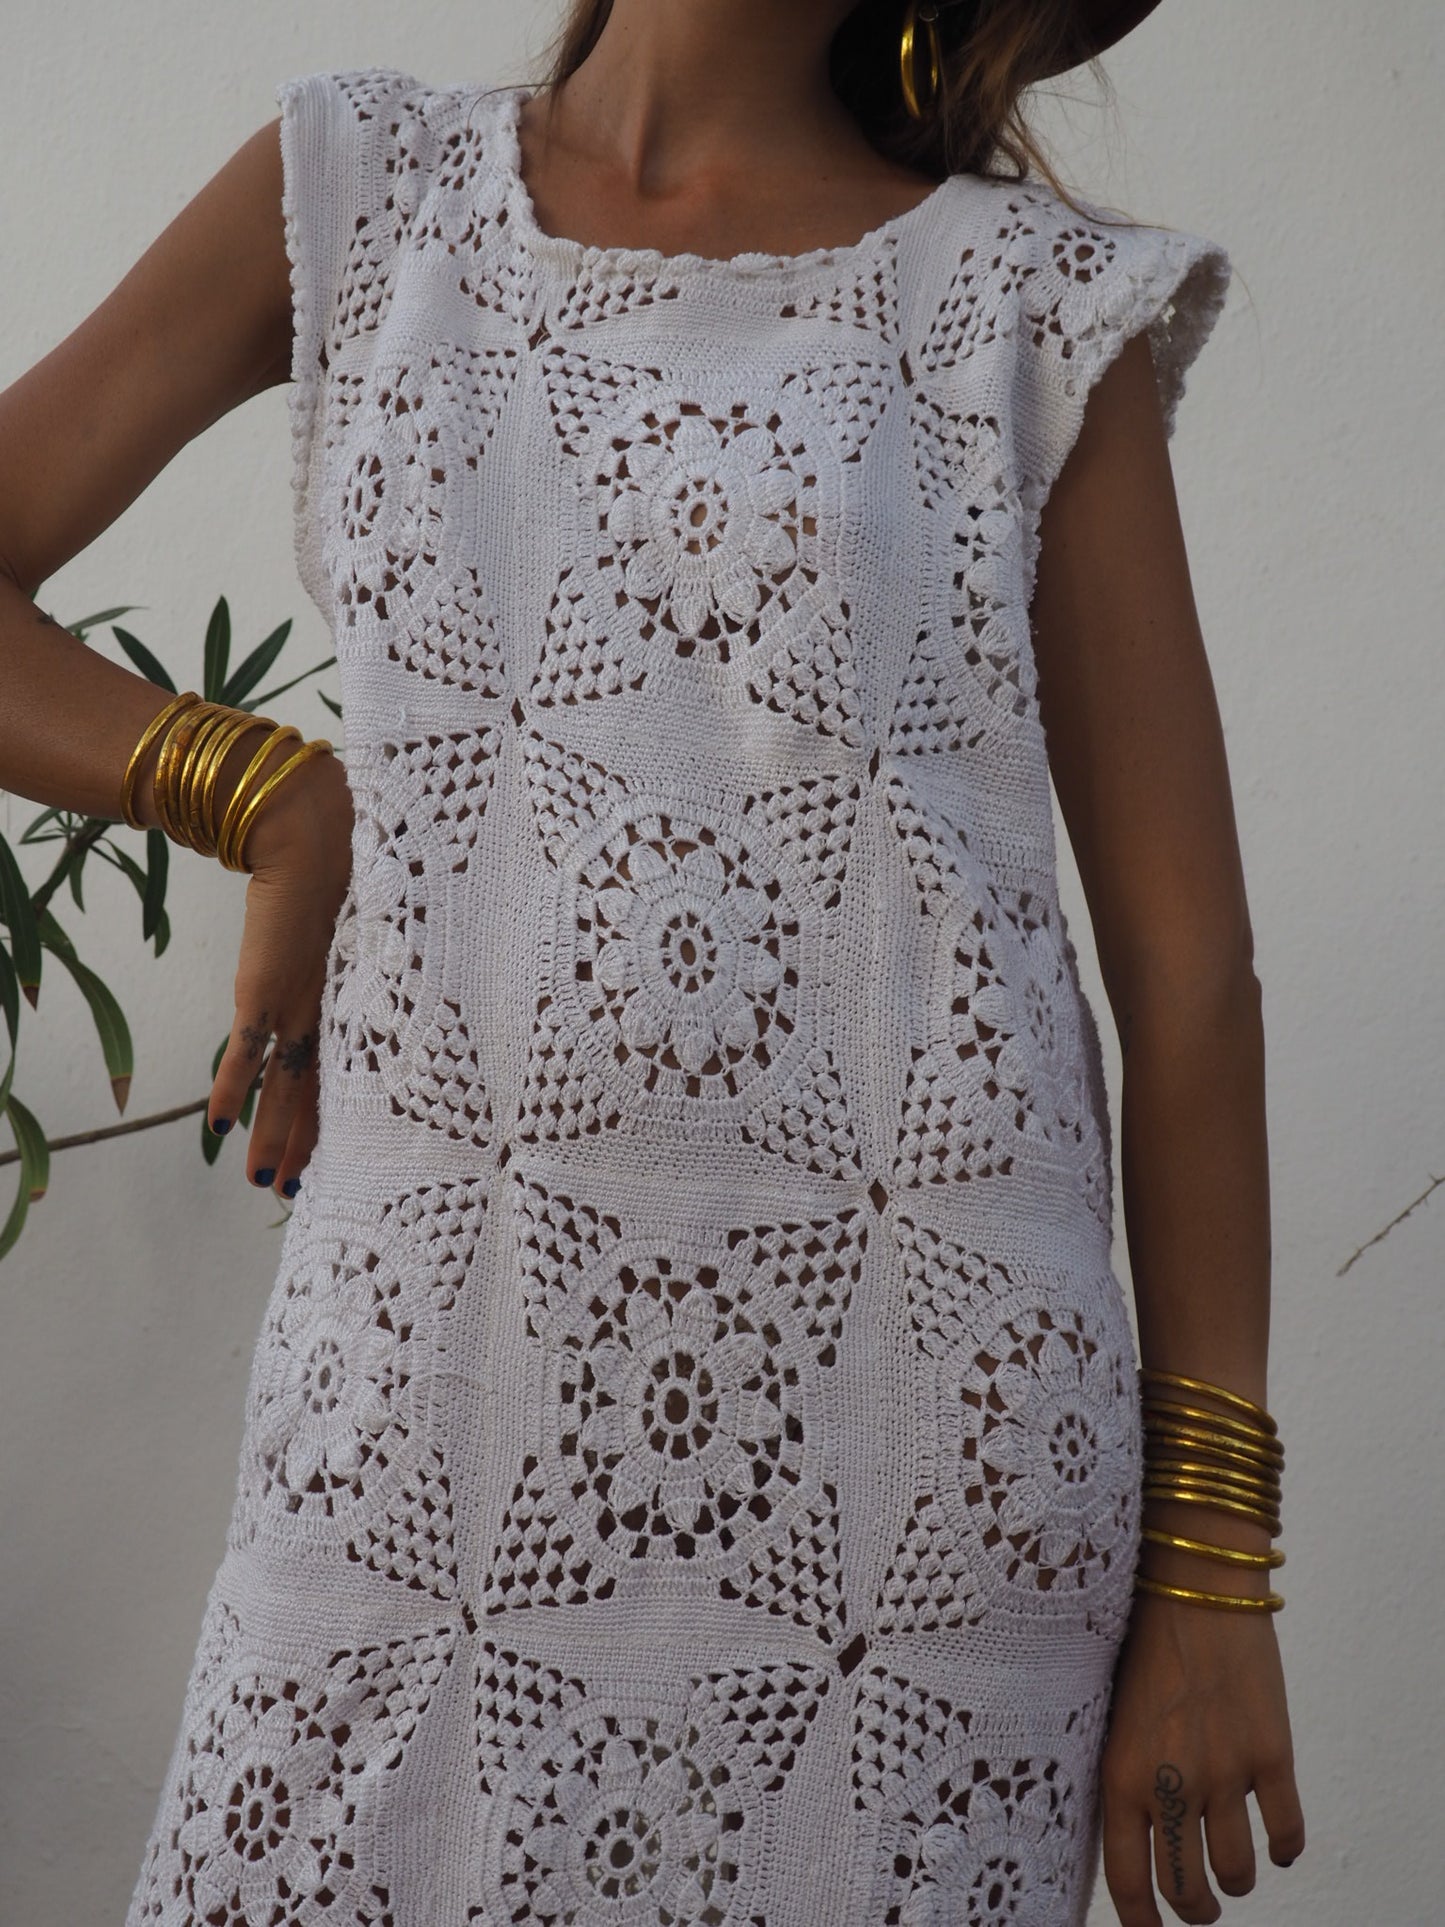 Super cute up-cycled long white crochet dress with lots of detailed hand work